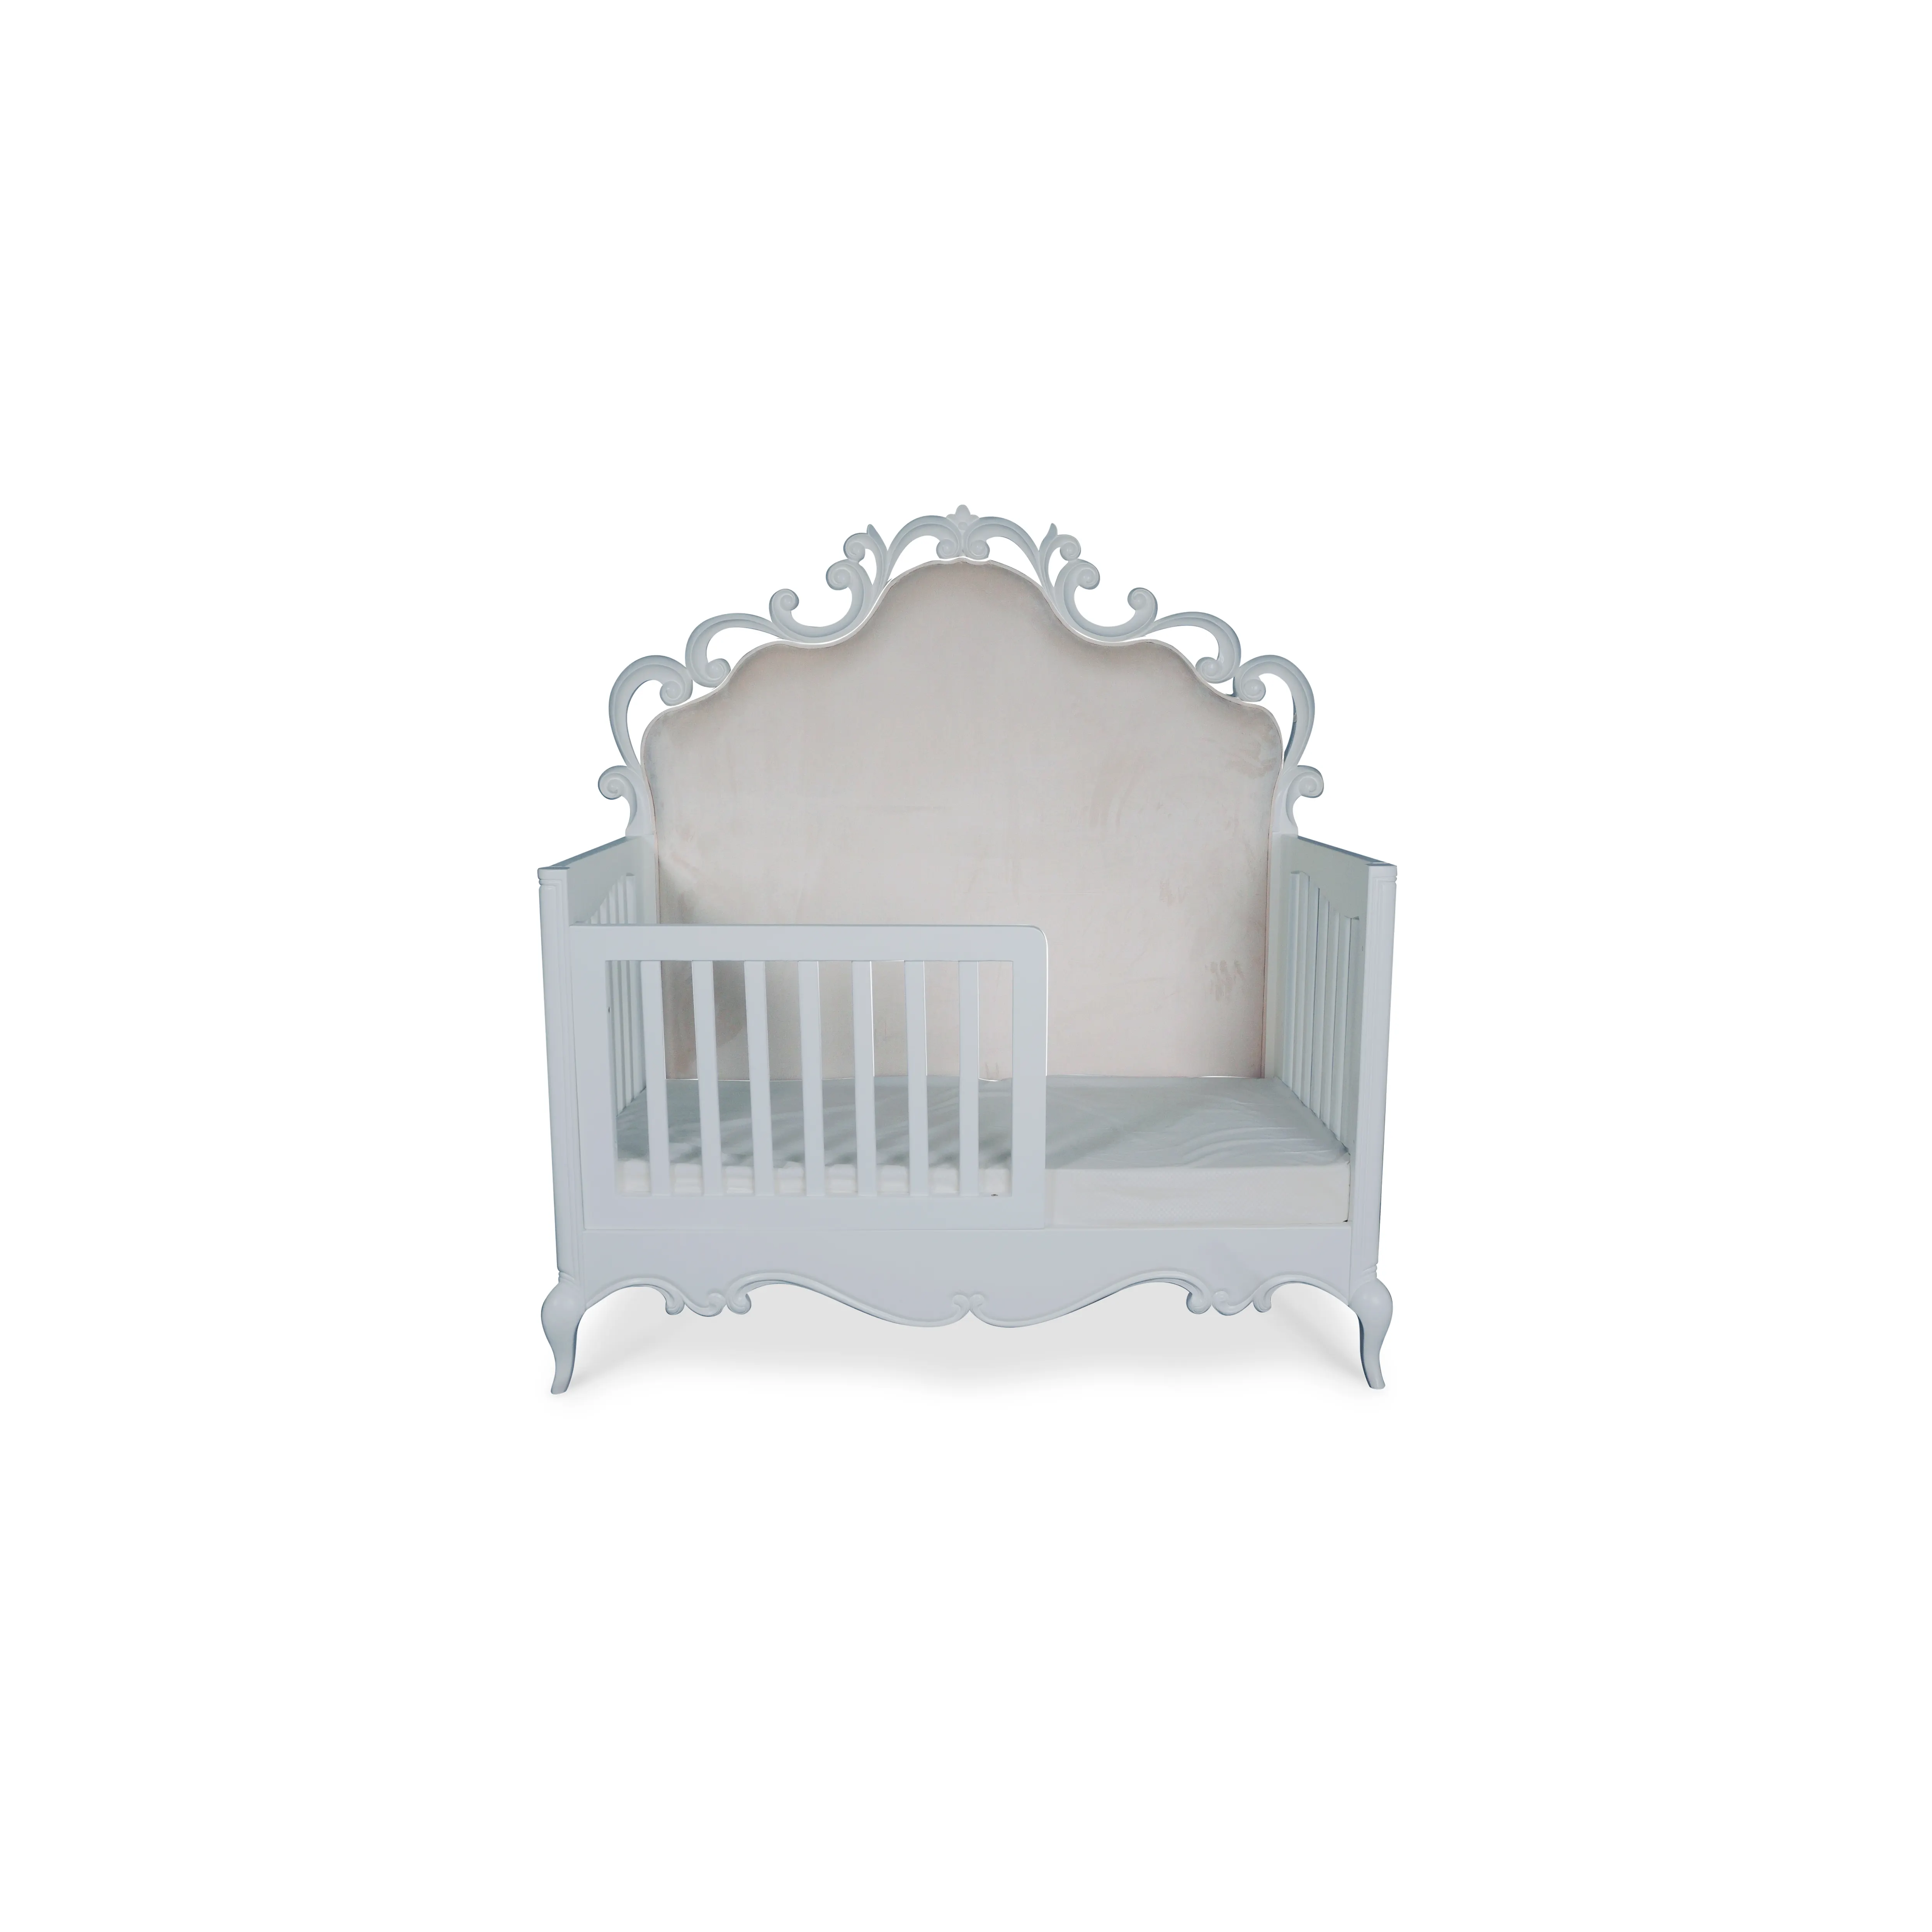 Carabella Baby Cot With Toddler Hand Carving Baby crib Made From Mahogany Wood Elegant Design Velvet Fabric